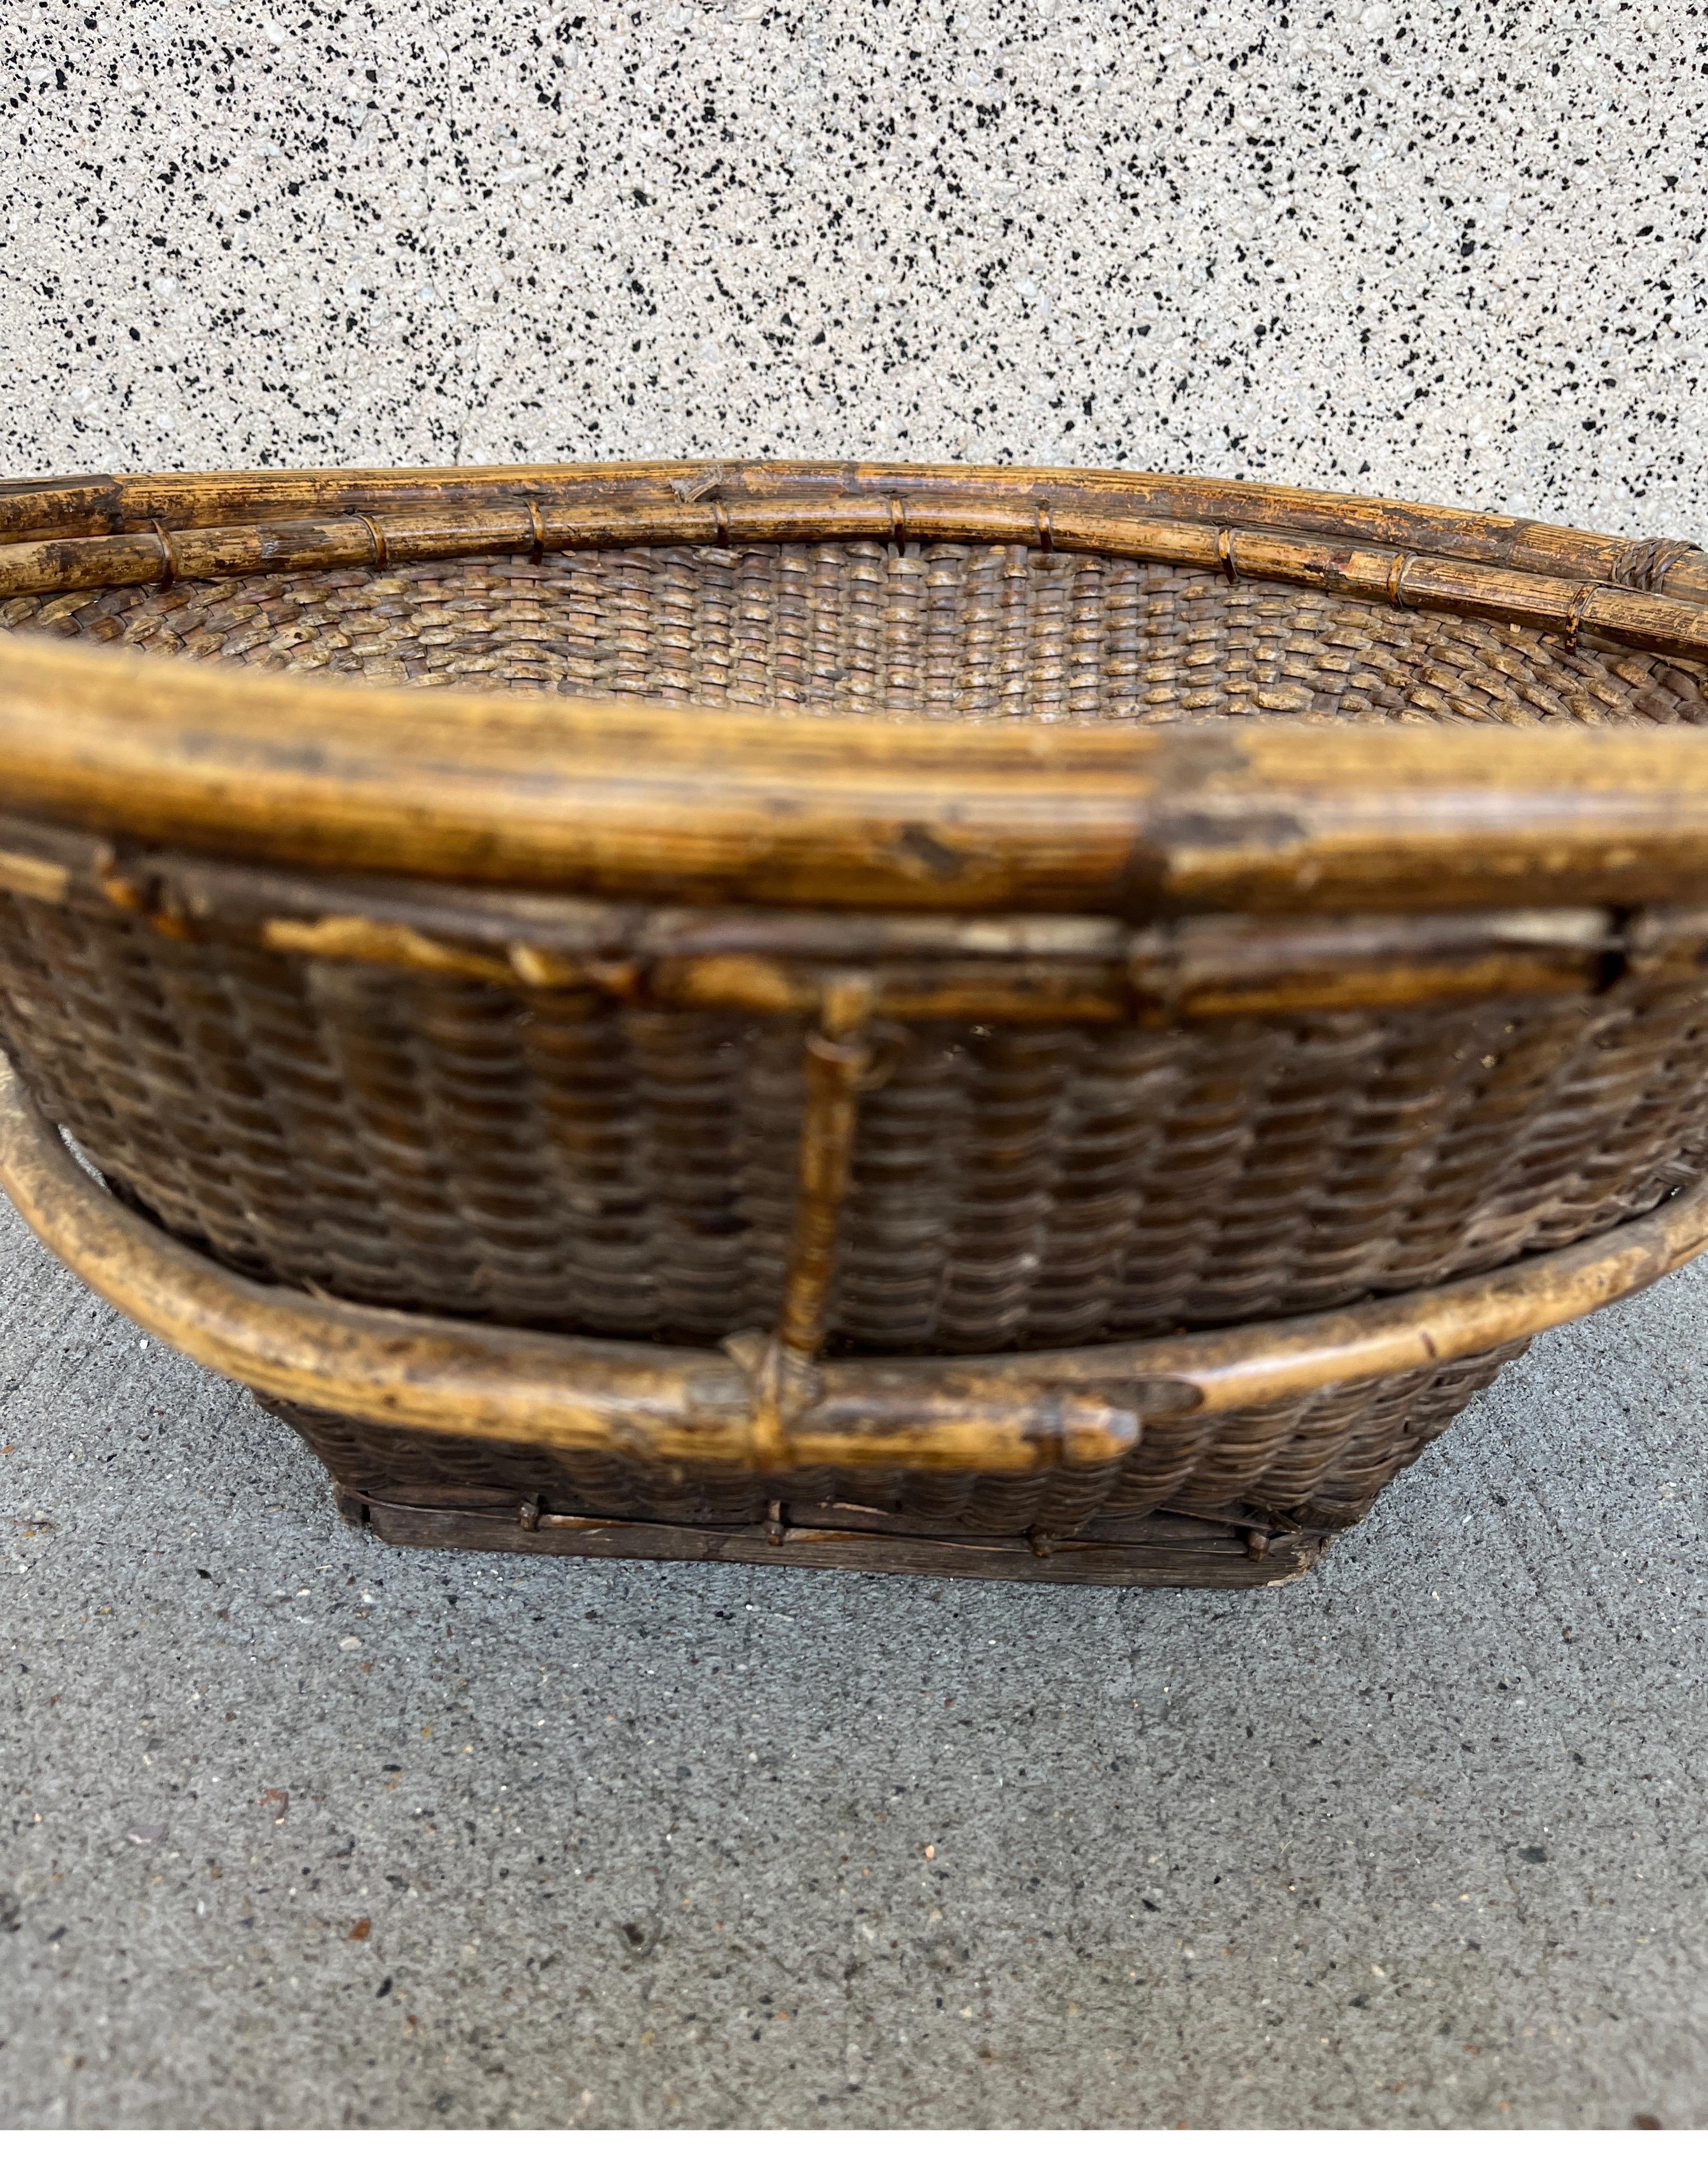 Contemporary Woven Basket, Phillipines 3